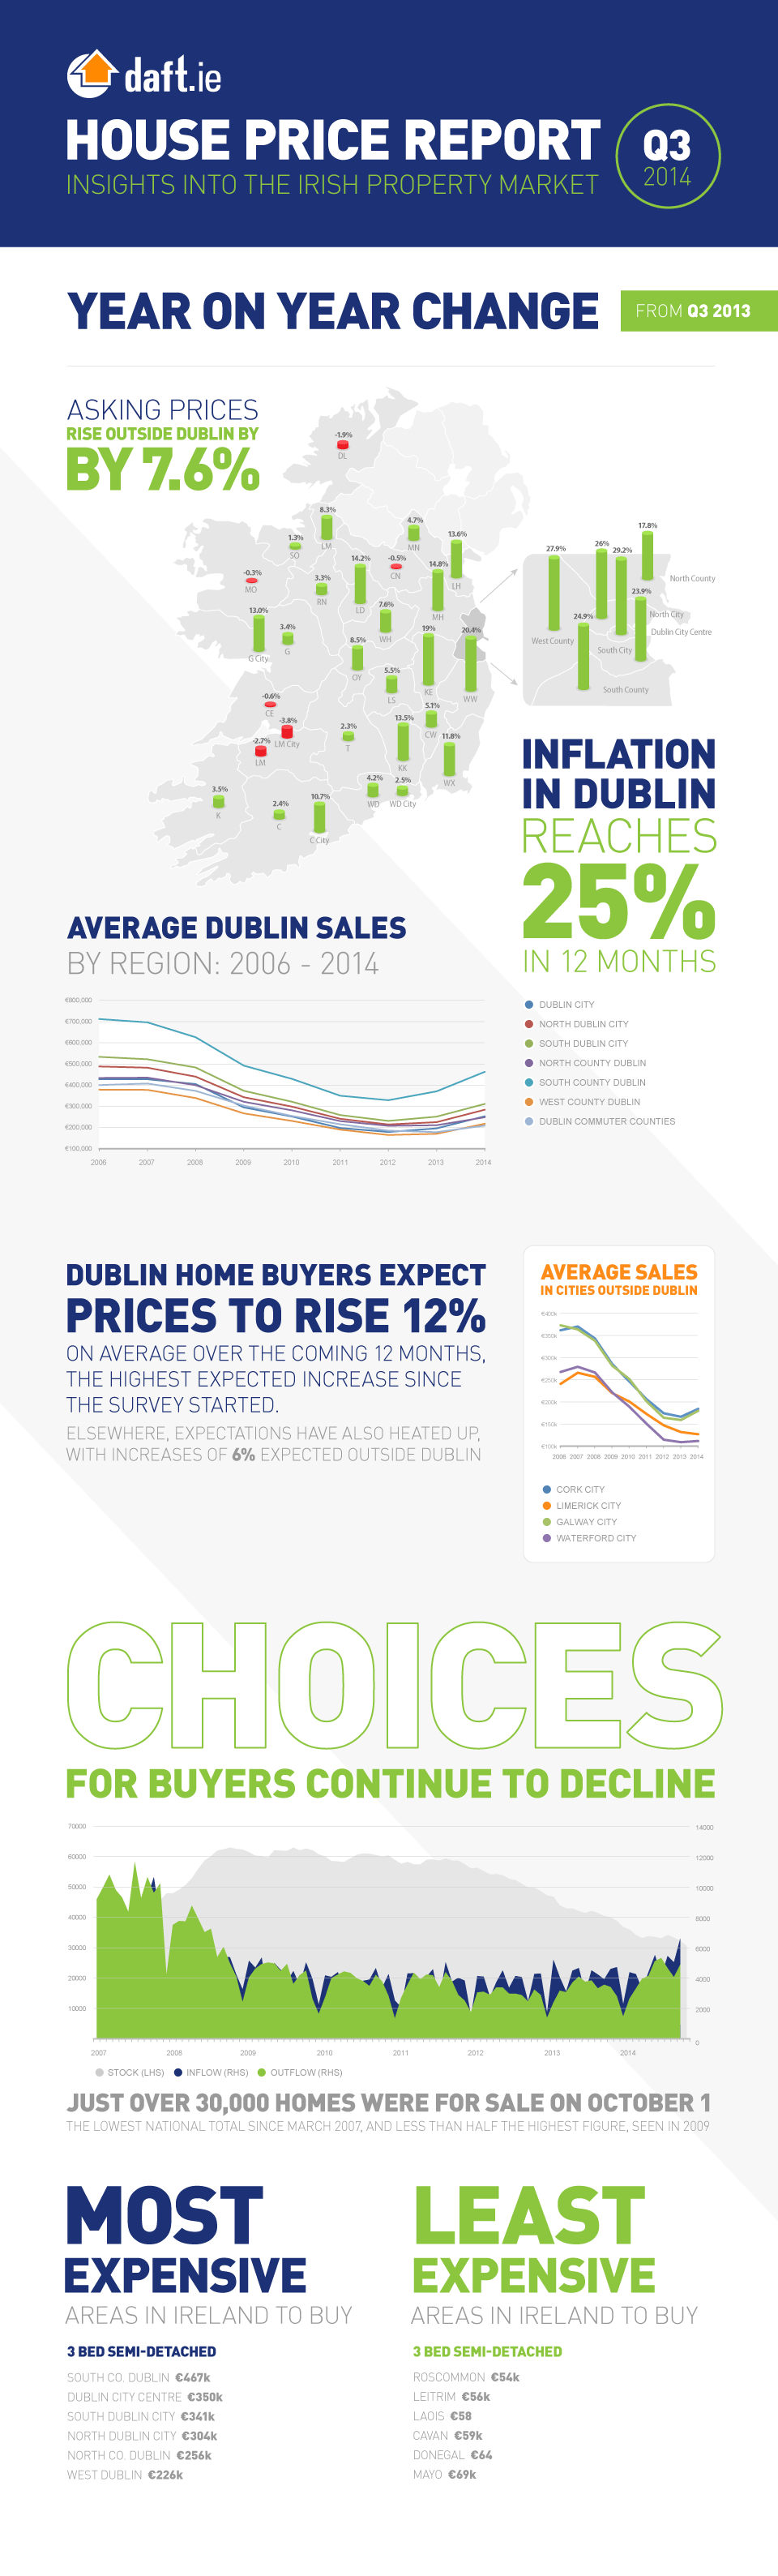 Daft.ie House Price Report: Q3, 2014 Infographic